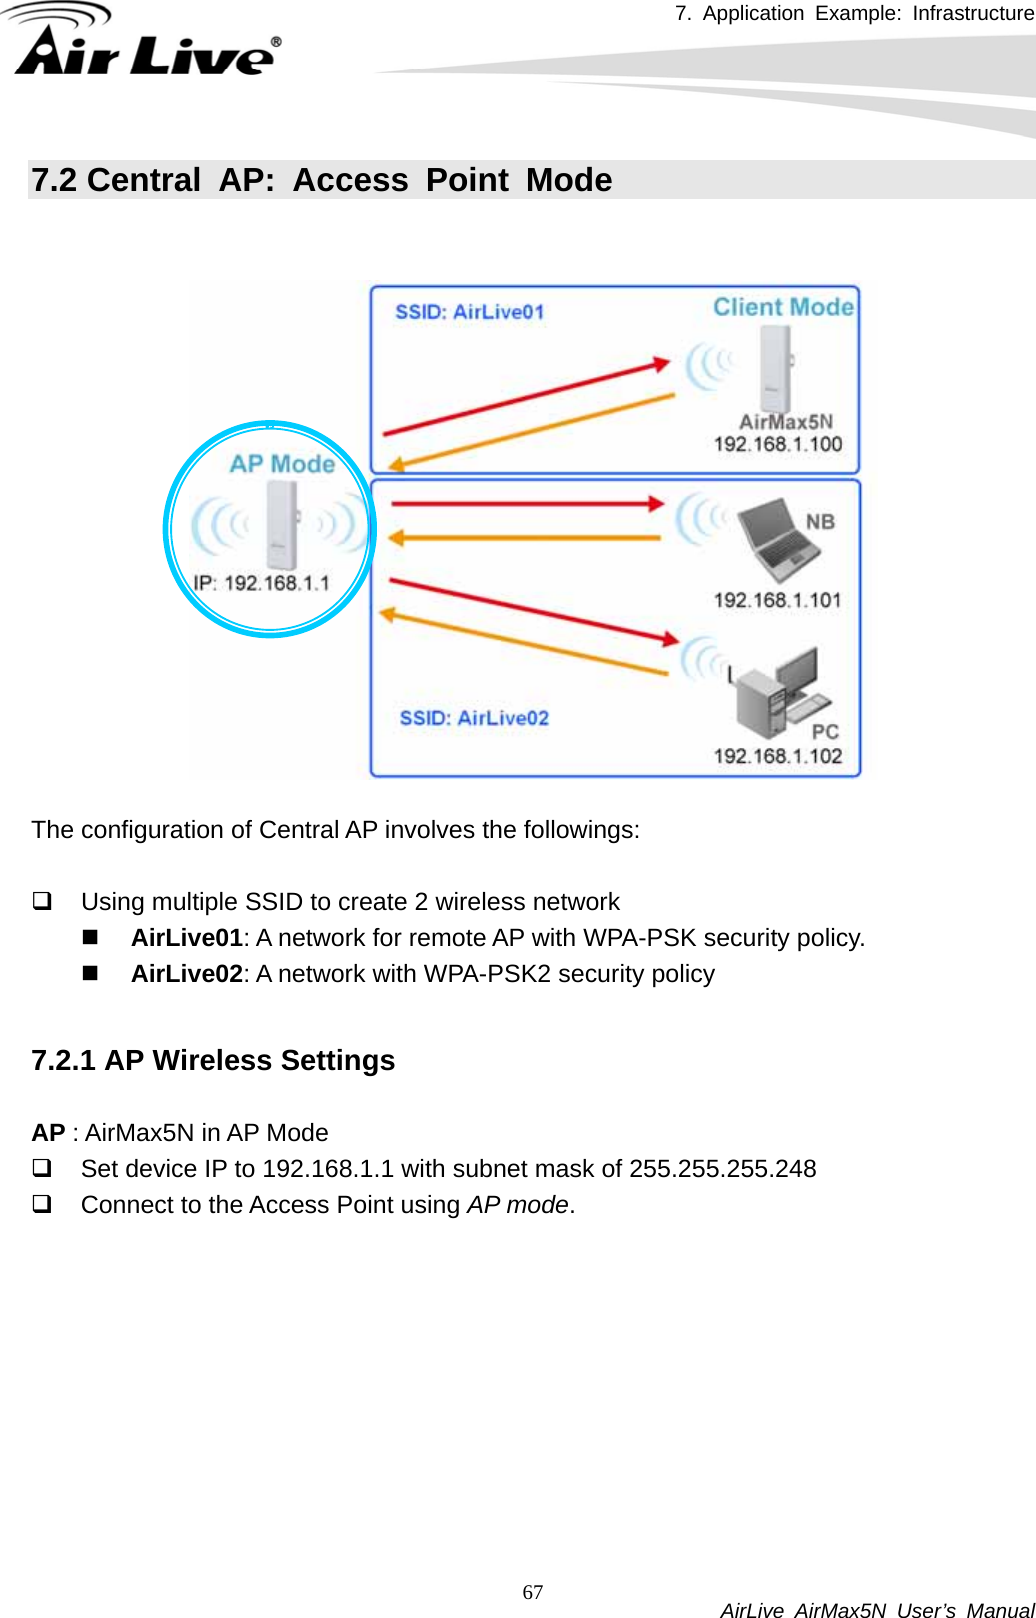 7. Application Example: Infrastructure           AirLive AirMax5N User’s Manual 677.2 Central AP: Access Point Mode     The configuration of Central AP involves the followings:    Using multiple SSID to create 2 wireless network  AirLive01: A network for remote AP with WPA-PSK security policy.  AirLive02: A network with WPA-PSK2 security policy  7.2.1 AP Wireless Settings  AP : AirMax5N in AP Mode   Set device IP to 192.168.1.1 with subnet mask of 255.255.255.248   Connect to the Access Point using AP mode.            